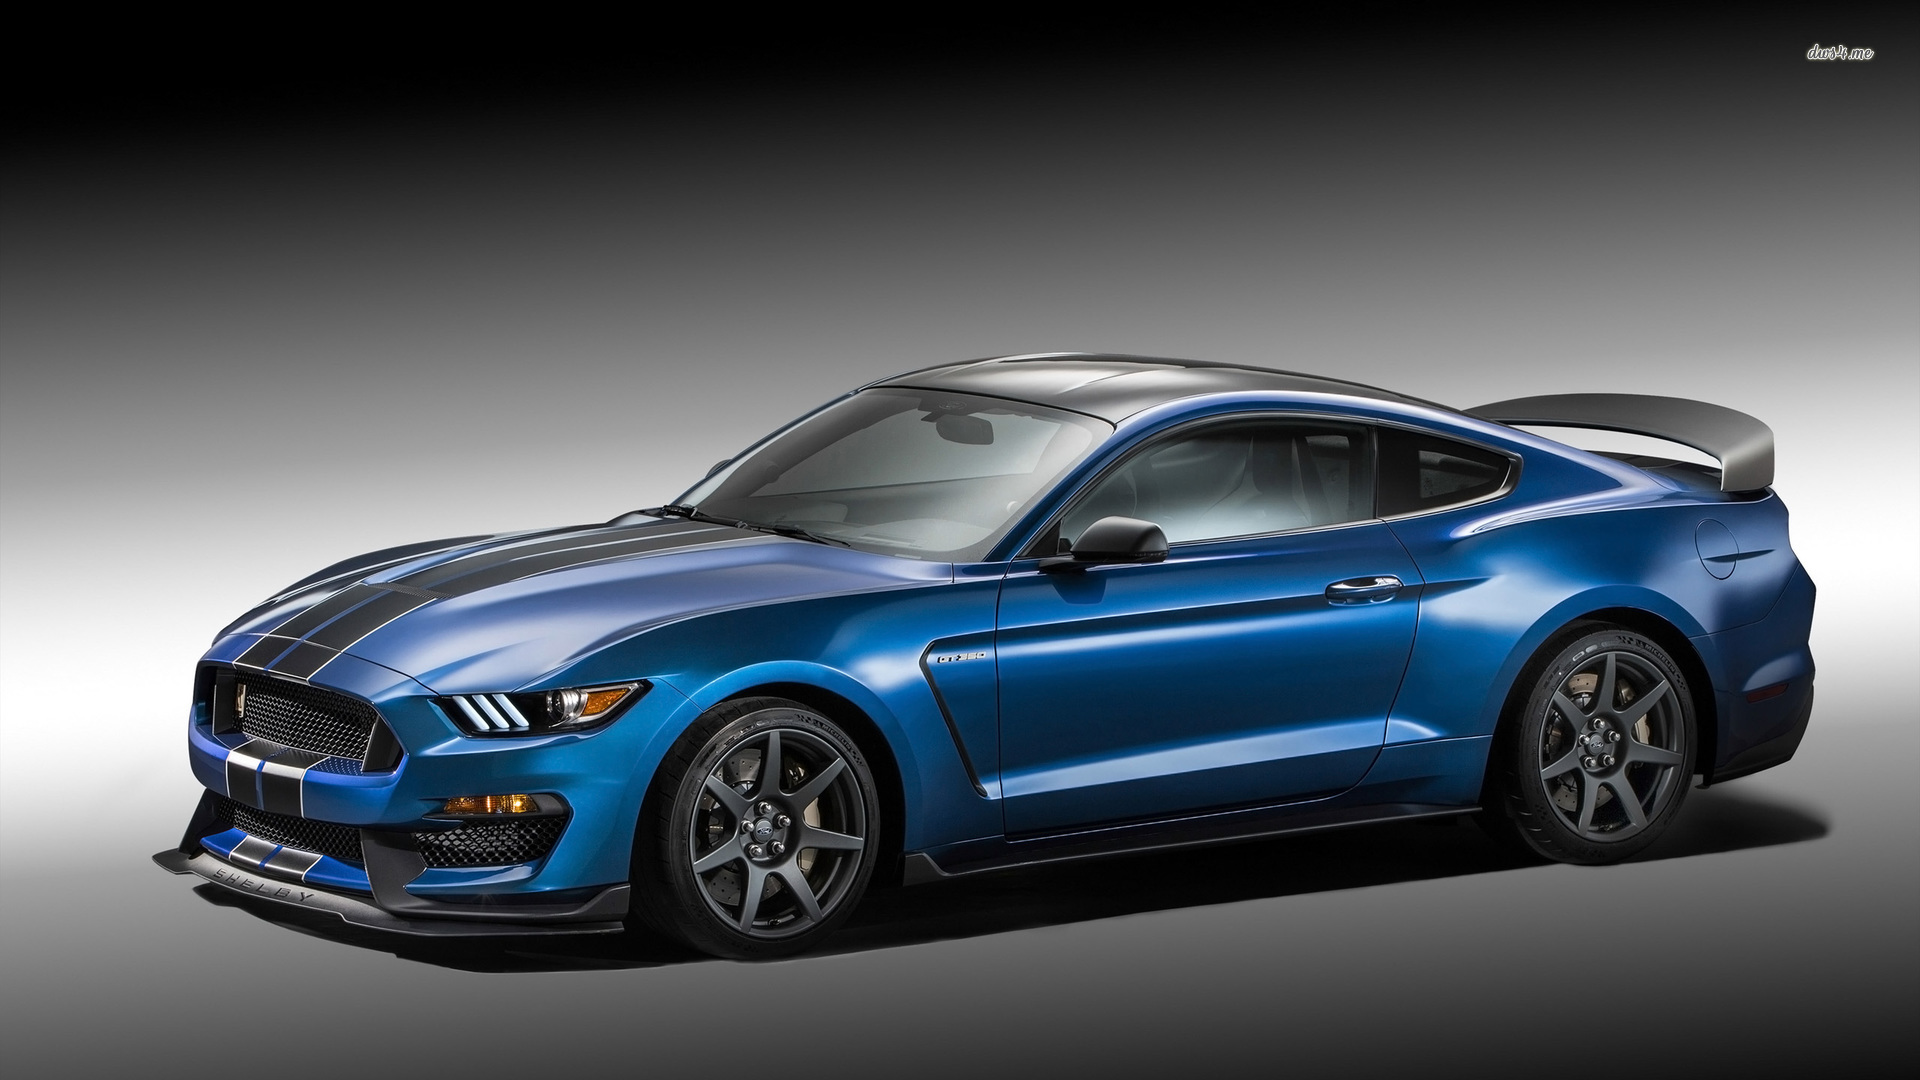 Ford Mustang Shelby Gt350 Wallpaper Car